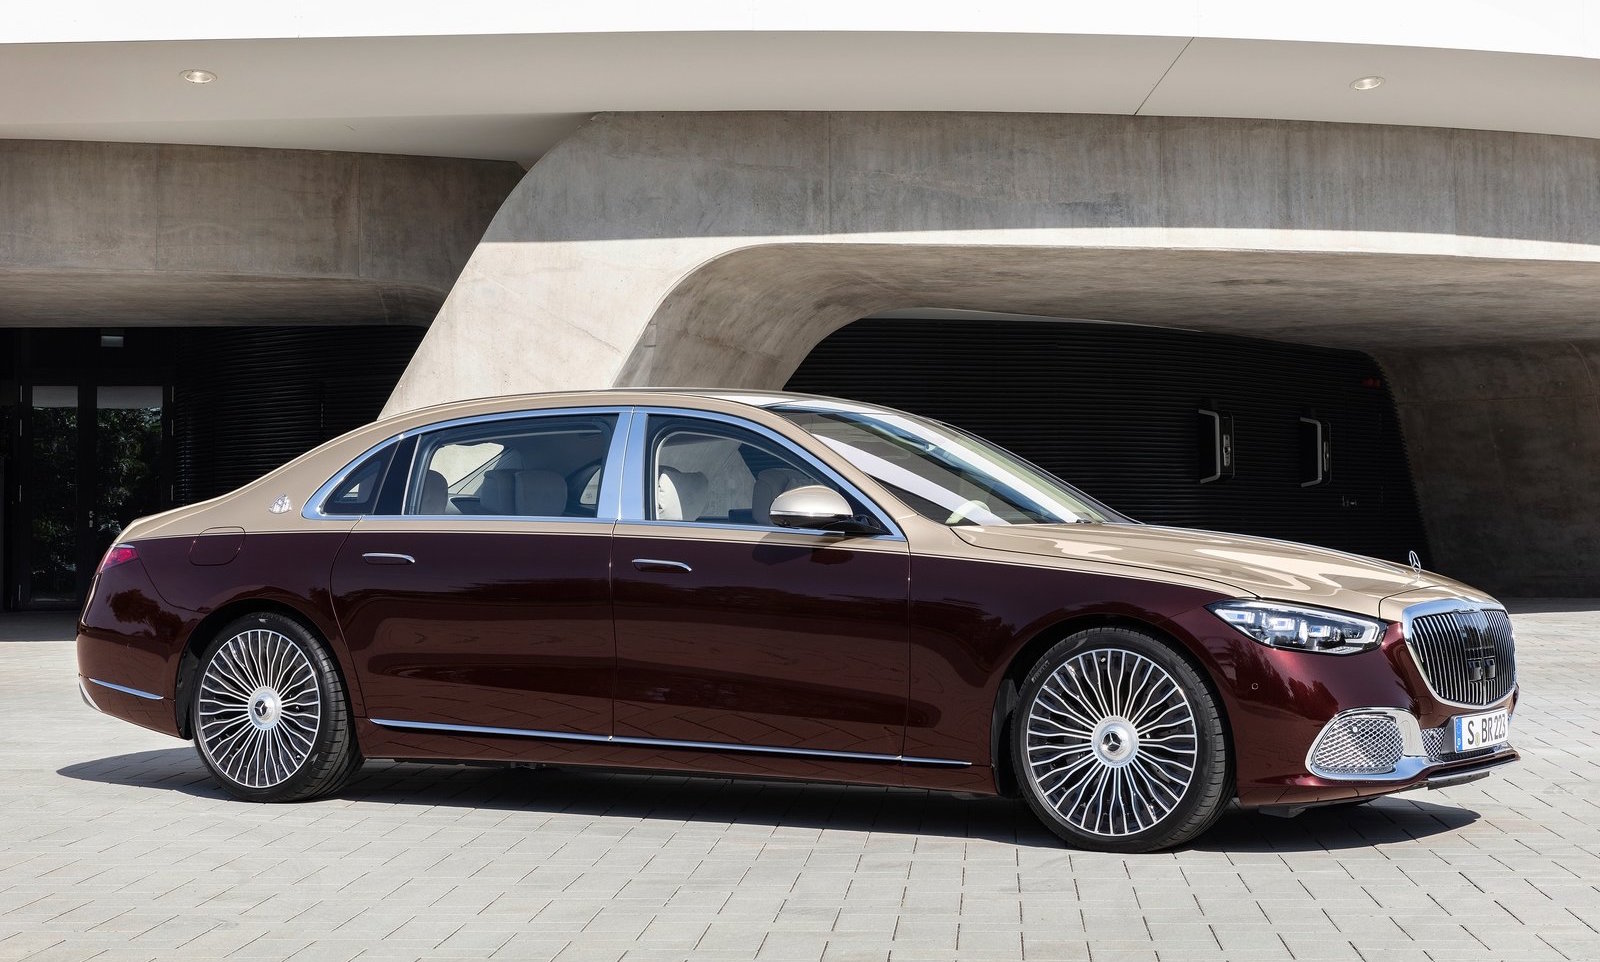 Exquisite 2021 Mercedes-Maybach S-Class revealed – PerformanceDrive